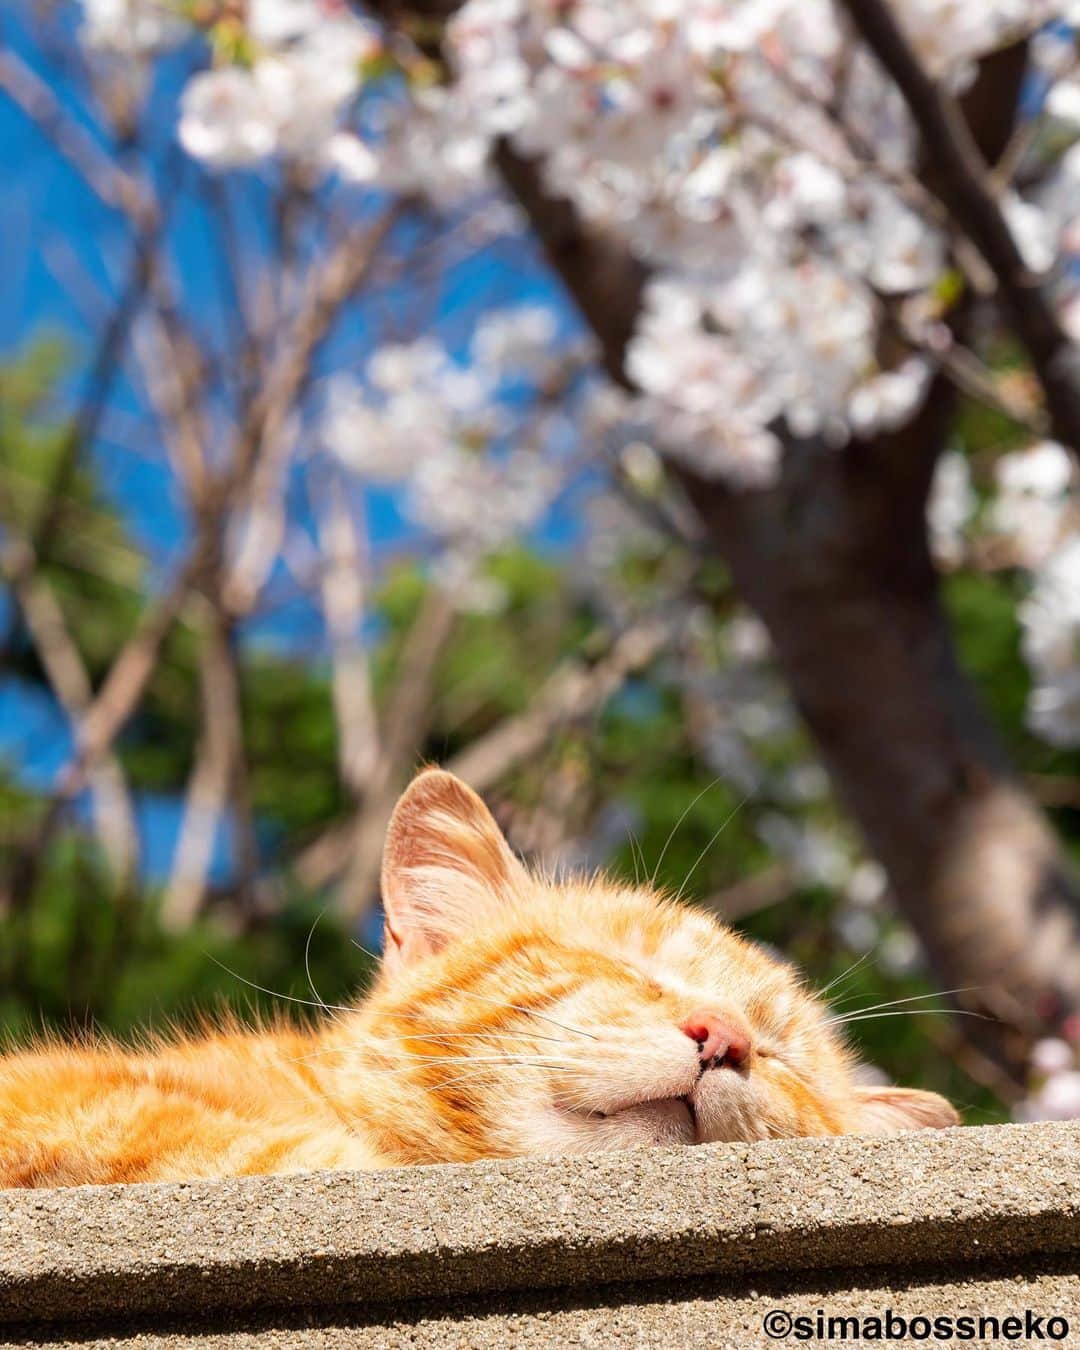 simabossnekoさんのインスタグラム写真 - (simabossnekoInstagram)「・ 春を満喫しますにゃね😽🌸 I enjoying spring to the fullest❣️ Swipeしてね←←🐾  6枚目の投稿は動画です。 The 6th post is video.  〜お知らせ〜 新作写真集「島にゃんこ」好評発売中❣️ @simabossneko と、ぺにゃんこ( @p_nyanco22 )との初共著🐾  日本の島々で7年間撮り続けてきた、島の猫さん達のとびっきりの表情やしぐさがいっぱい✨ 厳選したベストショットから初公開の作品まで、愛おしくて幸せな瞬間を集めました。  ★メルカリShopsとminne simabossneko's shopでは、サイン本を販売中🐾  お気に入りの一冊になれば嬉しく思います☺️  📘A5変形サイズ／88ページ 1,210円(税込) ワニブックス刊  販売各ショップへは @simabossneko もしくは @p_nyanco22 のプロフィールURLよりご覧いただけます。  もしくはminne、メルカリShops内にて "simabossneko's shop"と検索ください🔎 ・ ・ 【Notice】 NEW 3rd Photobook "Shima Nyanko (Island Cats)"  The book is co-authored by @simabossneko and @p_nyanco22  There are lots of wonderful photos of island cats✨  ◆The autographed books are available now at “minne simabossneko's shop“.   〜Description of the work〜 The cute cats that we have been shooting for 7 years in the islands of Japan.  From the carefully selected best shots to the first public photo, we have collected lovely and happy gestures. Kissing, cuddling, rubbing, synchronizing, playing, licking... The cats will heal you!  Please make a purchasing for this opportunity 😸🐾 The product page can be seen from the URL in the profile of @simabossneko or @p_nyanco22   ★simabossneko's shop URL https://minne.com/＠simabossneko  It is possible to purchase and ship from Taiwan, Hong Kong, the USA, Korea, etc. ※ Shipping fee will be charged separately.  📘A5 variant size / 88 pages 1,210 JPY Published by Wanibooks ・ ・  #写真集発売 #桜 #しまねこ #島猫 #ねこ #にゃんすたぐらむ #猫写真 #cats_of_world #catloversclub #pleasantcats #catstagram #meowed #ig_japan #lumixg9」4月7日 7時30分 - simabossneko